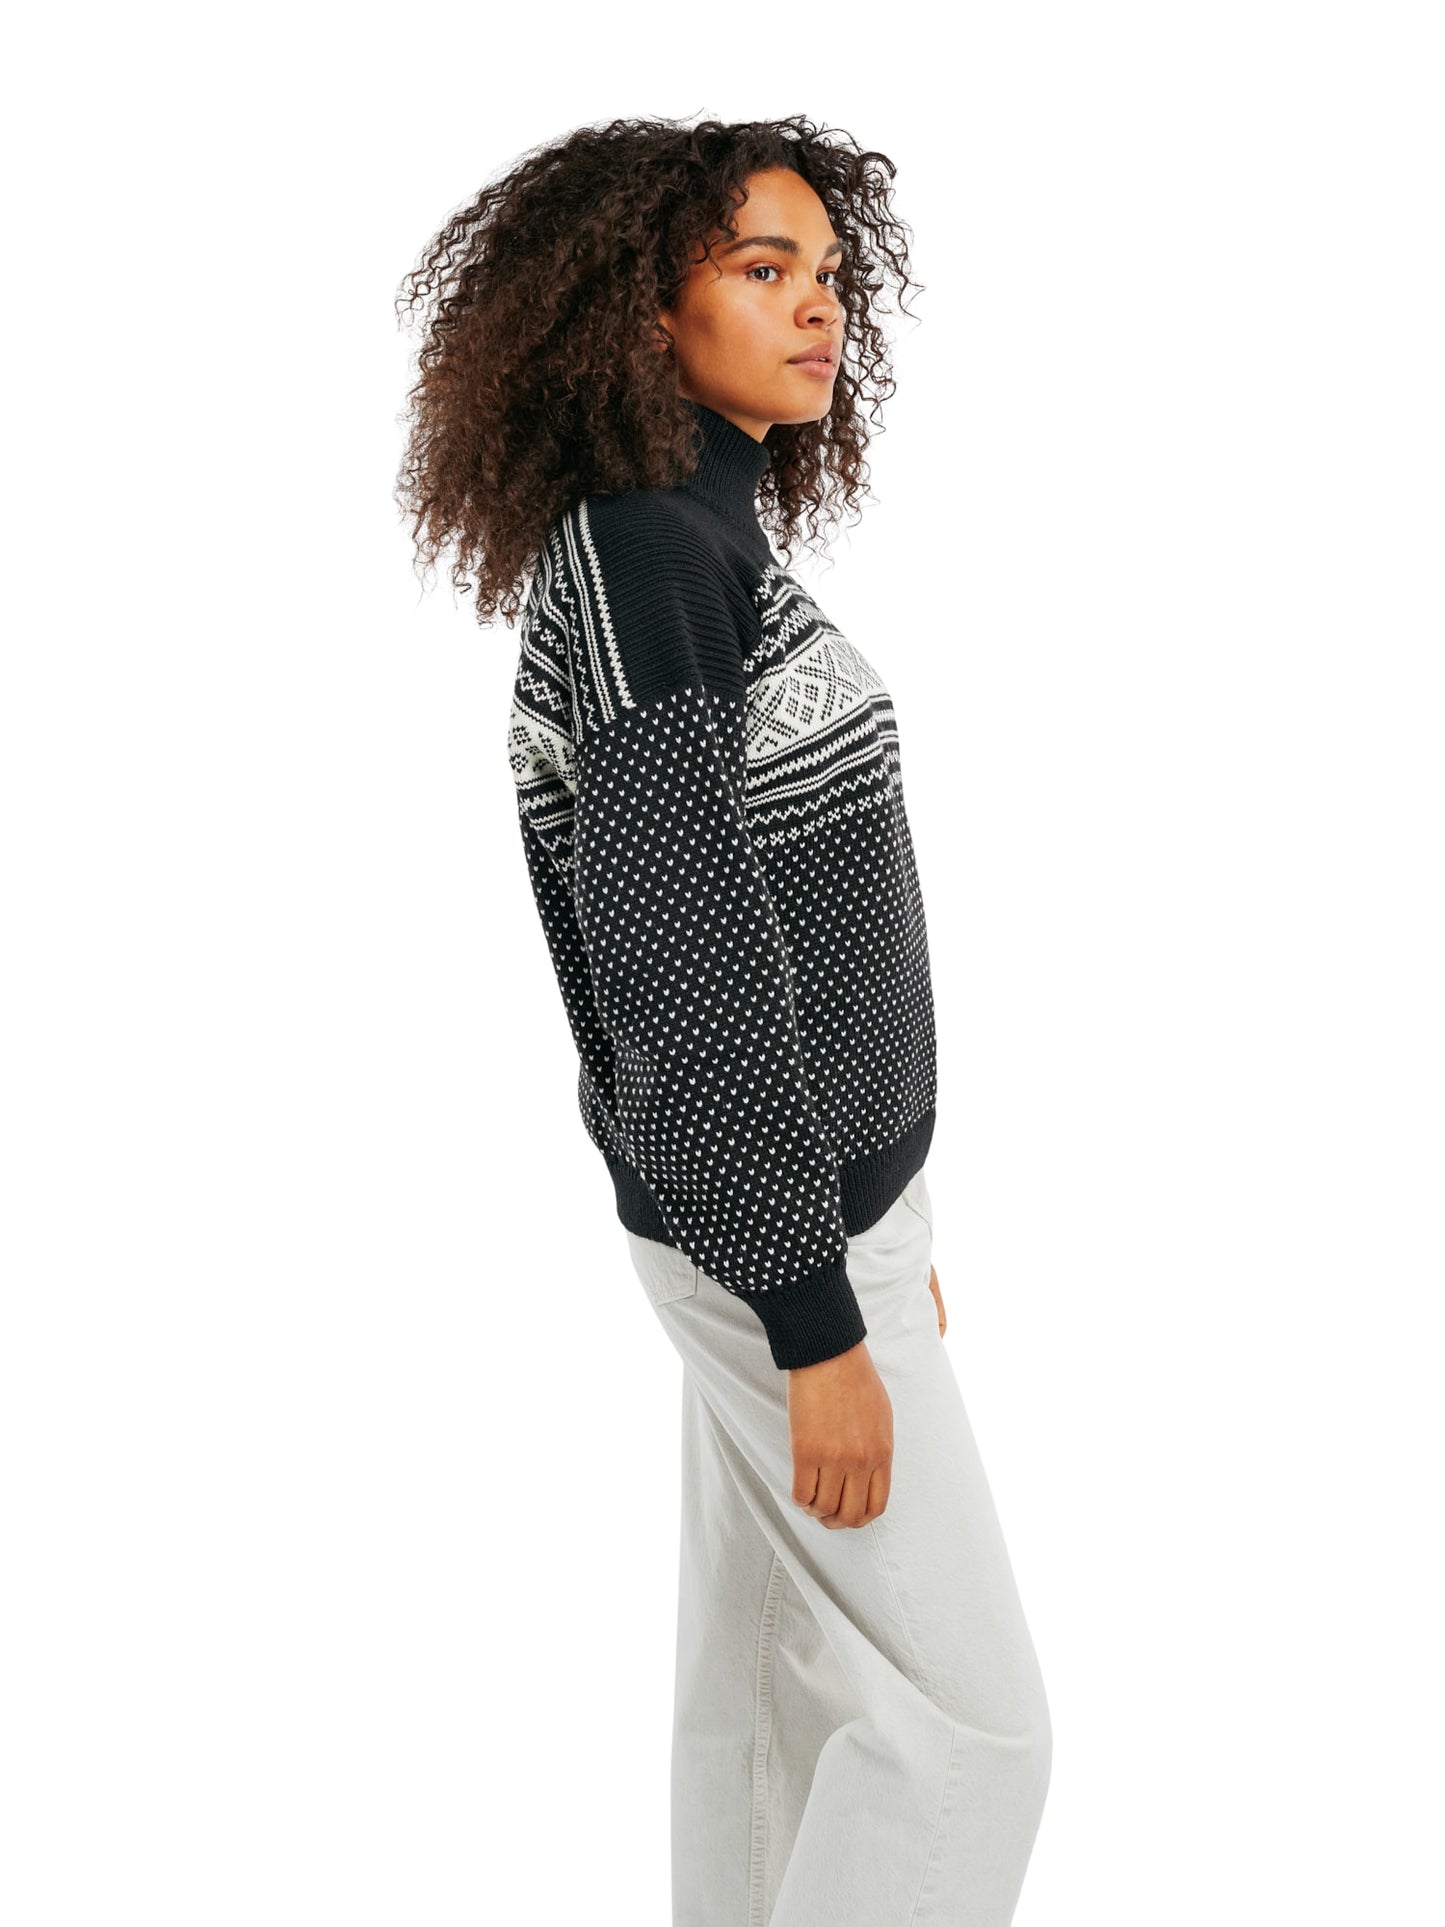 Dale of Norway - Valløy Sweater - Black offwhite (D)